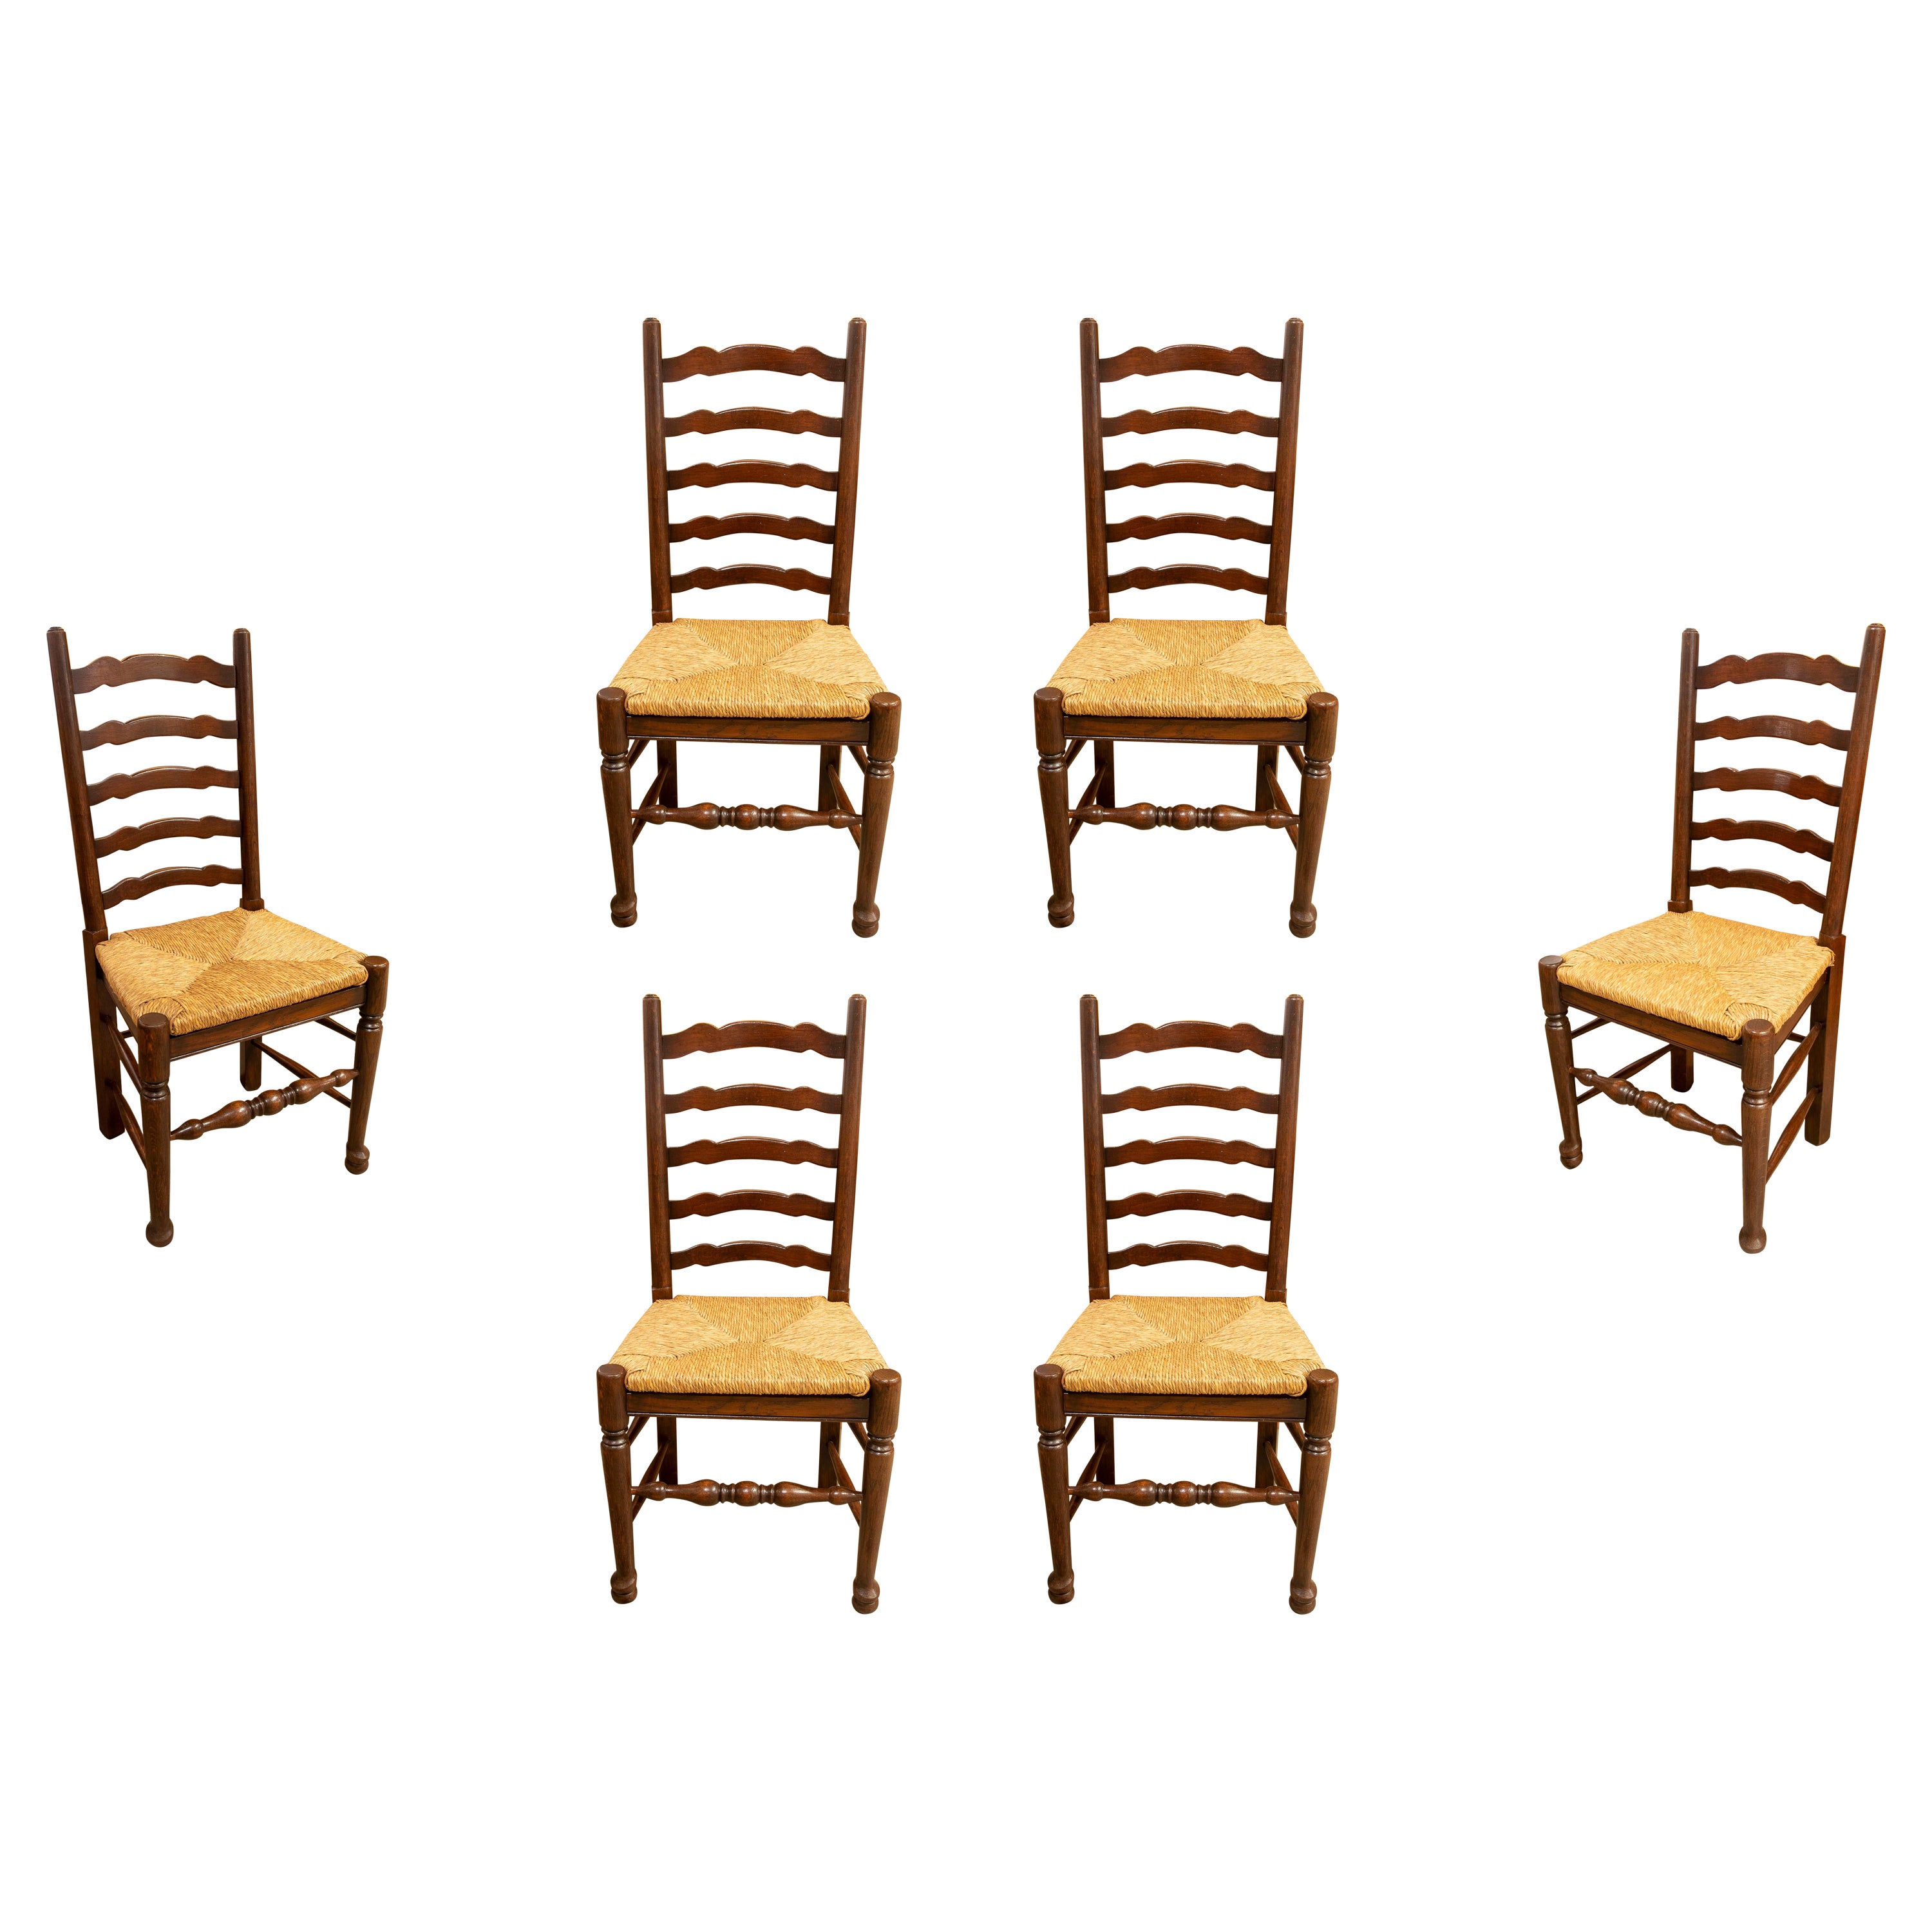 Spanish Set of Six Wooden Chairs with Bulrush Seats For Sale